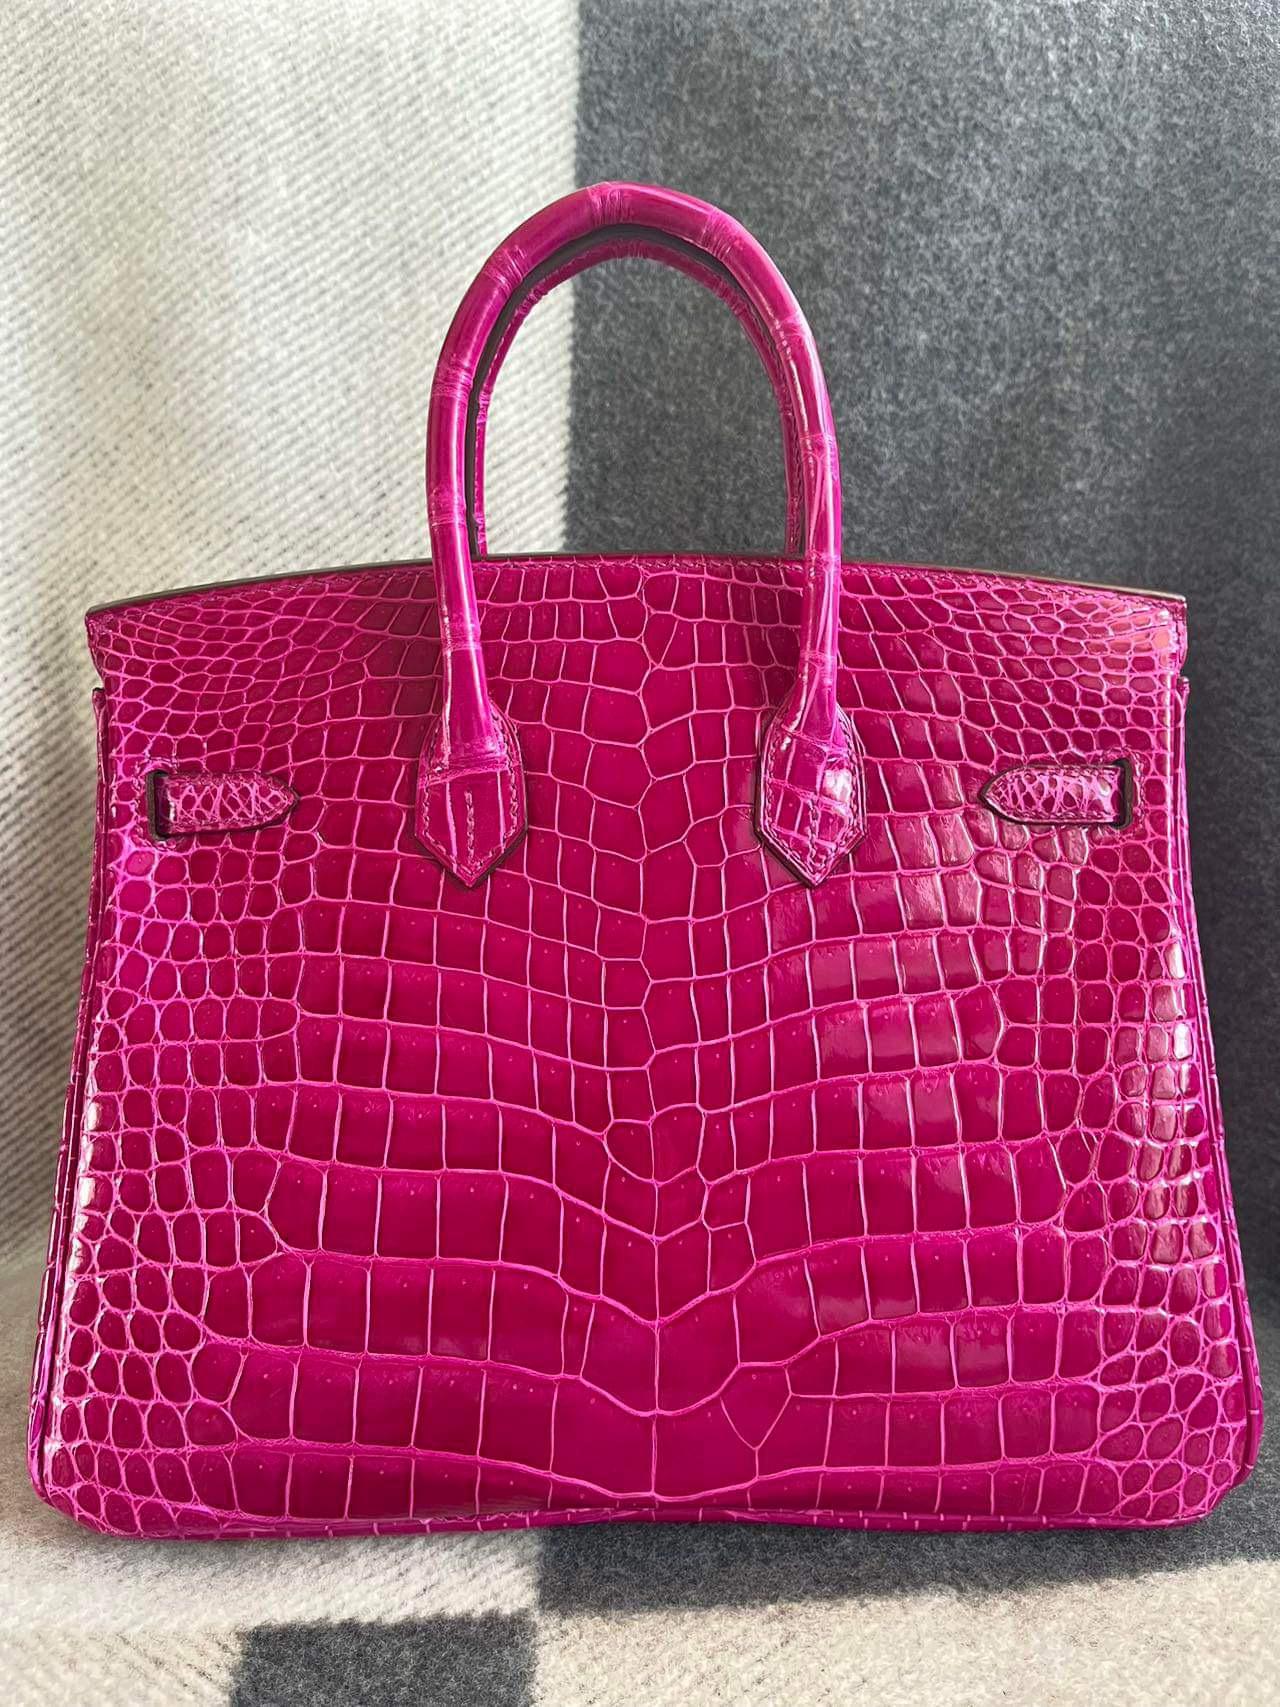 New bag. Bag comes with dust bag, box, Clochette, keys and rain coat. No receipt no CITES. Bag was never carried.
18K white gold with diamonds, Hermes diamonds not aftermarket. X stamp.
Beautiful masterpiece. Fuchsia pink color. All original